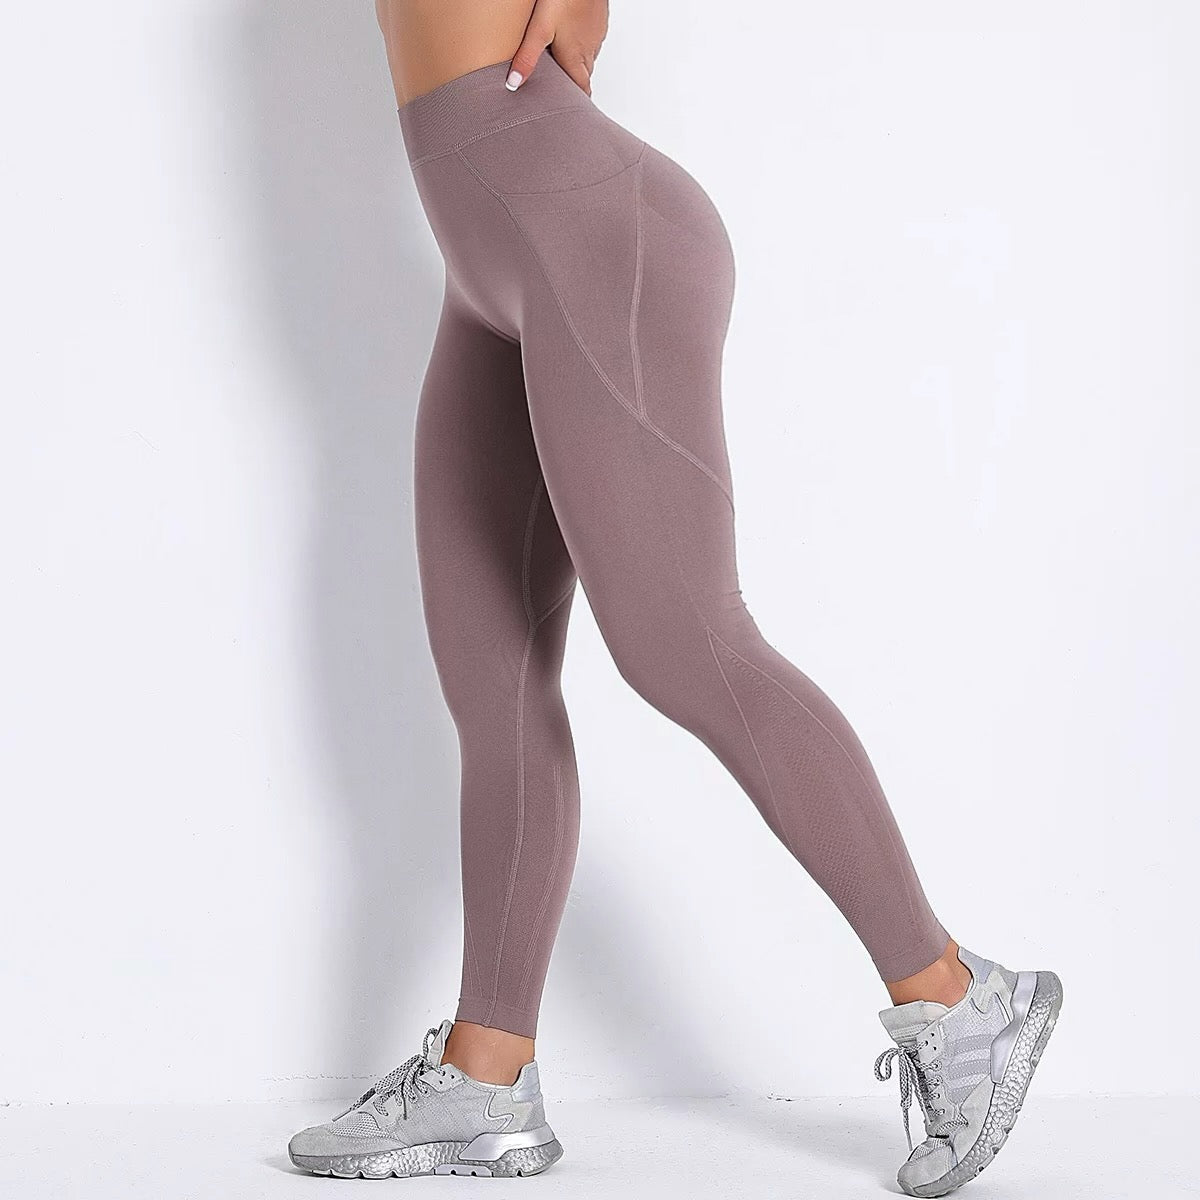 THE ESSENTIAL BASIC TIGHTS